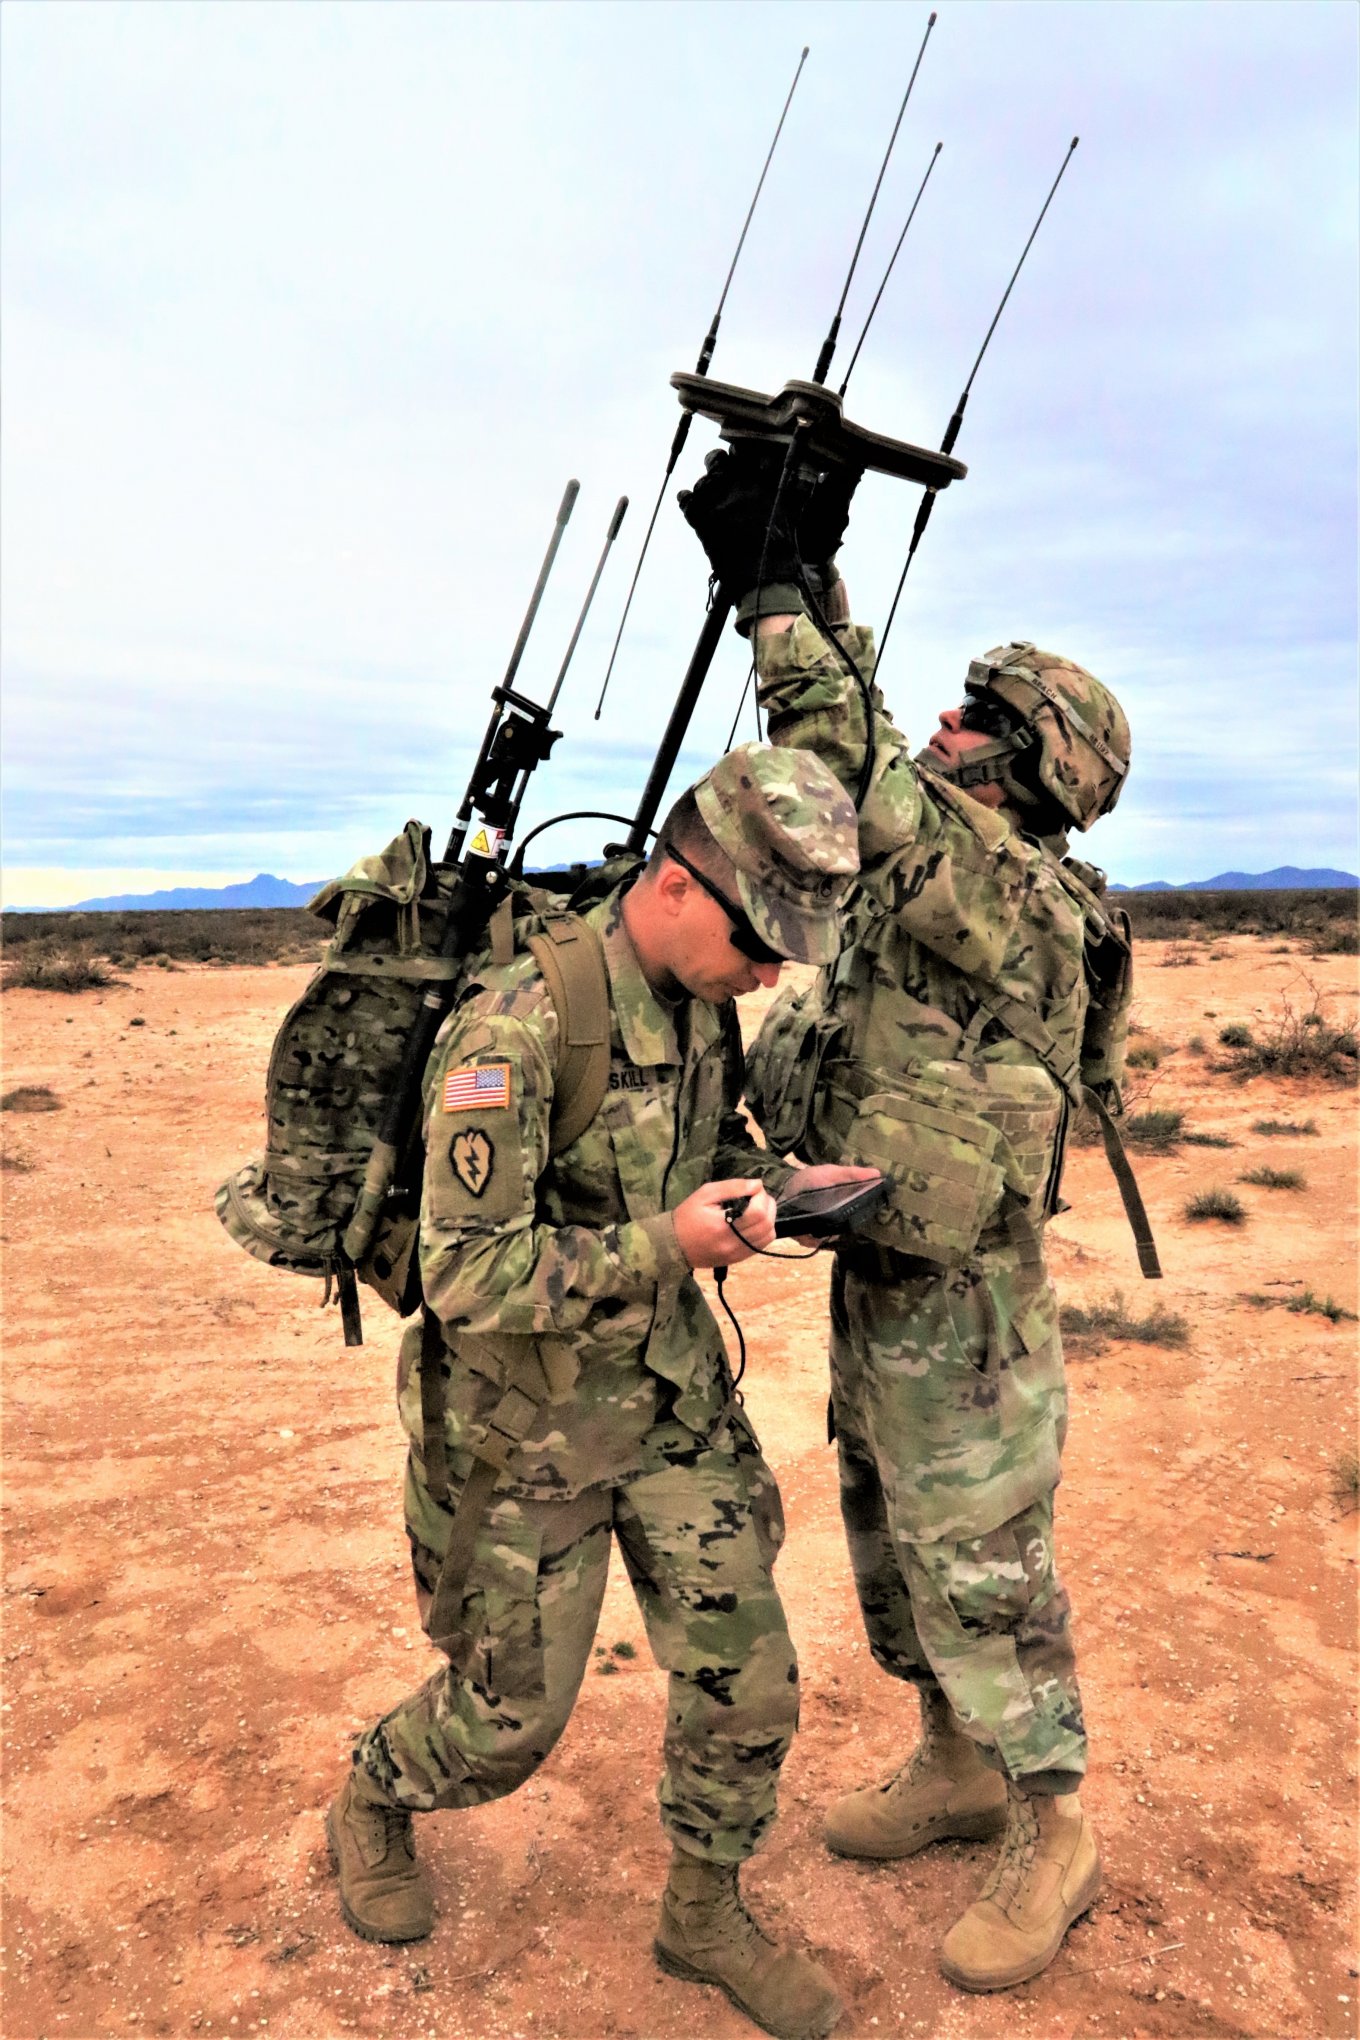 Wearable electronic warfare system Defense Express The U.S. Army Is Urgently Investing in Electronic Warfare Systems, the Deadline Is Six Months